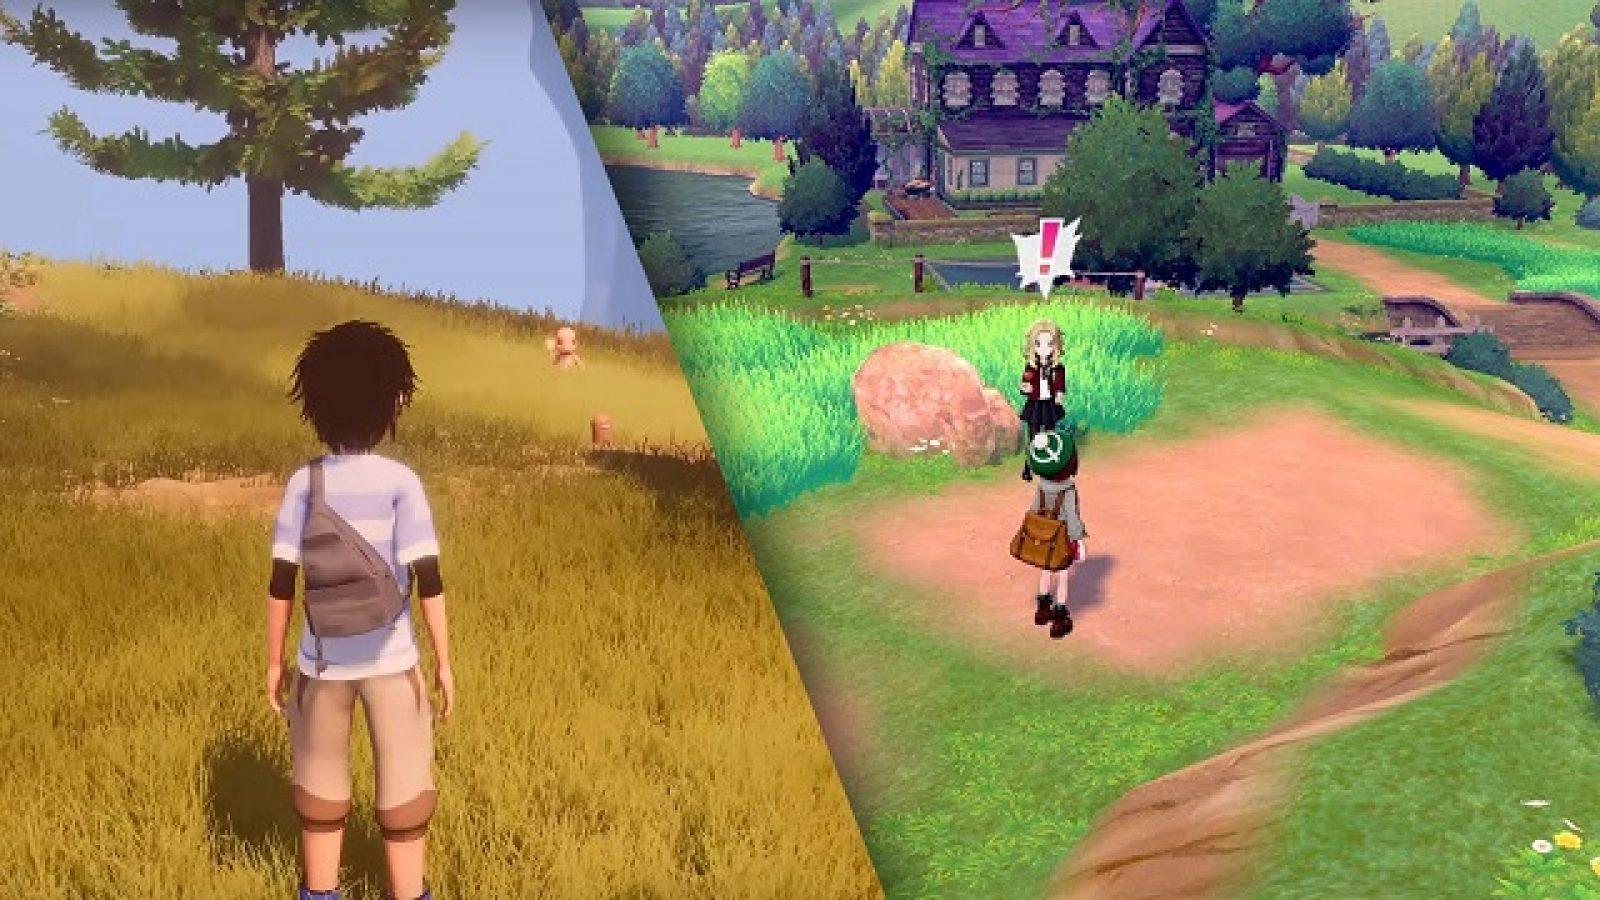 Pokemon Sword and Shield will have open-world gameplay and giant